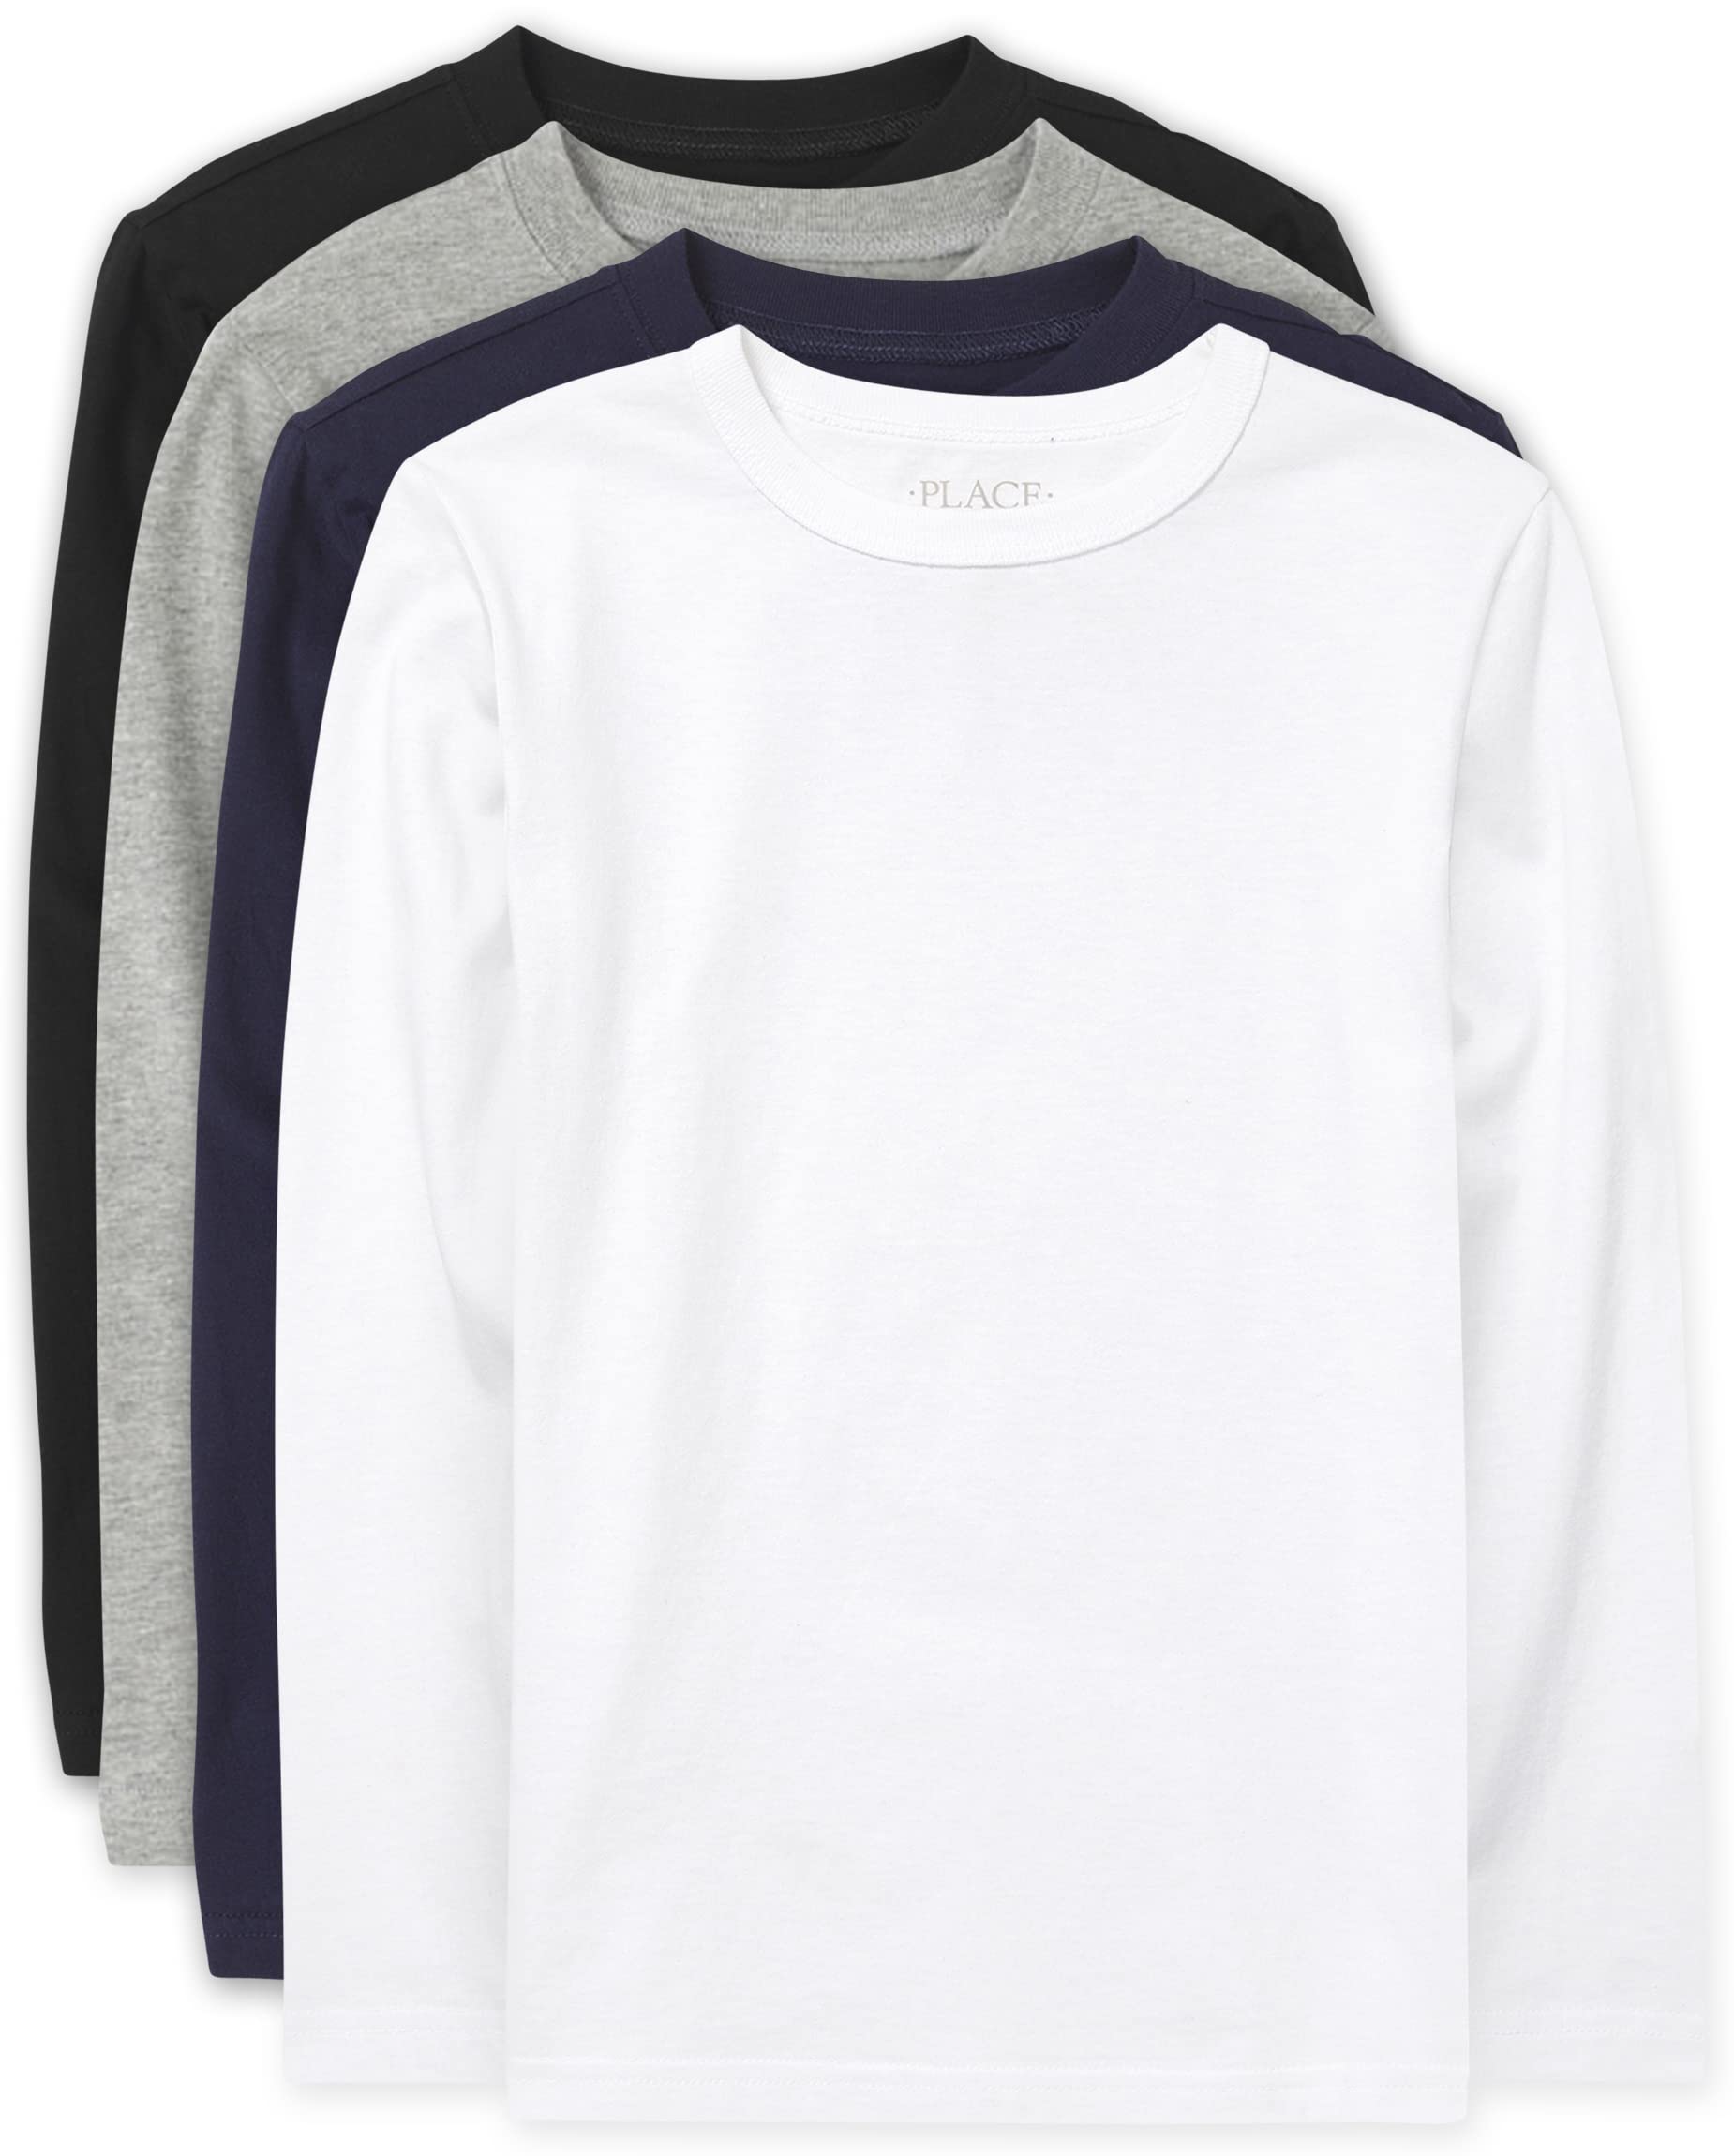 The Children's Place Boys' Uniform Basic Layering Tee 4-Pack